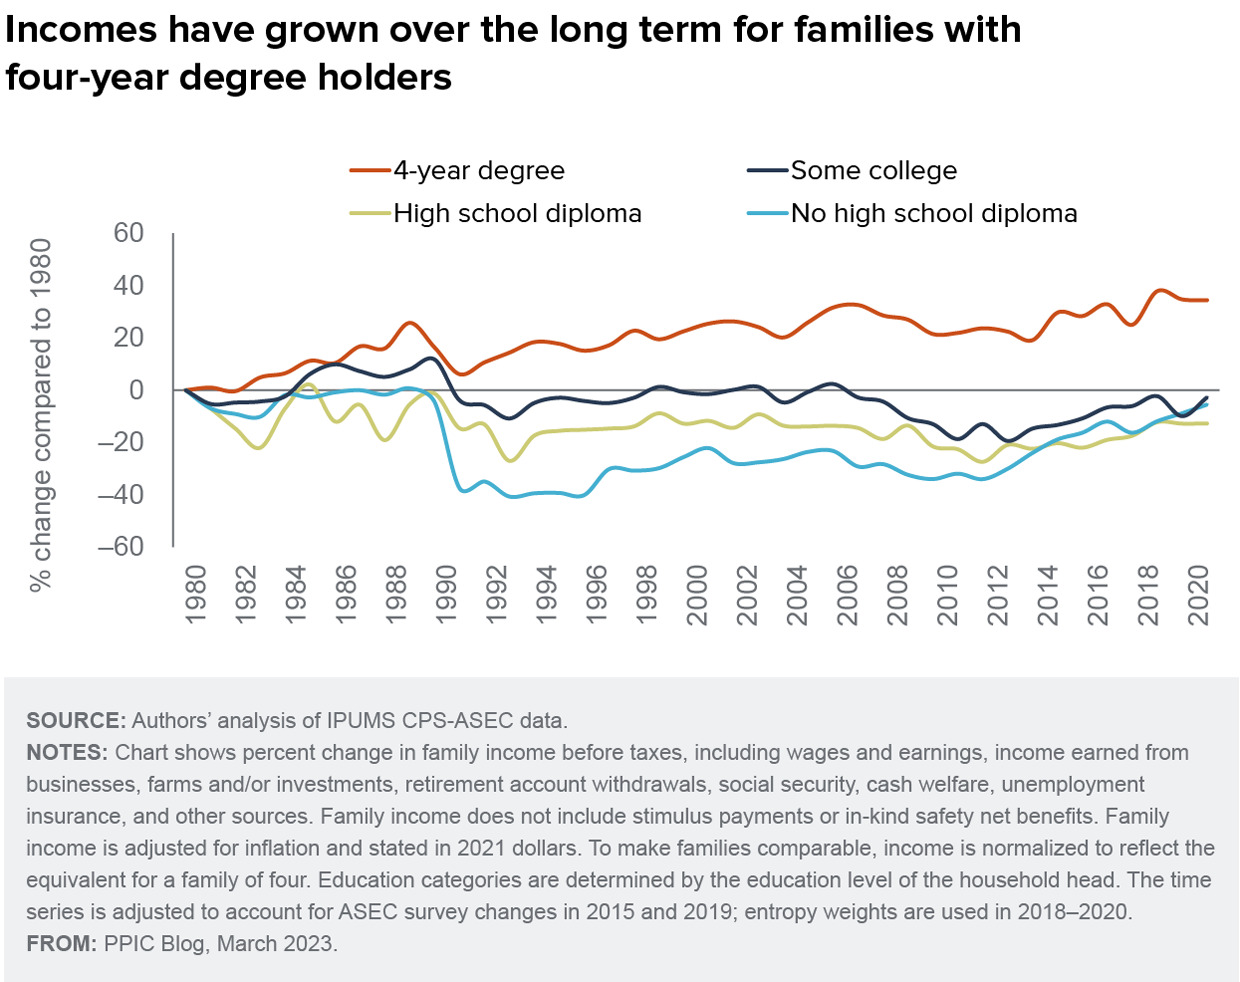 figure - Incomes have grown over the long term for families with four-year degree holders